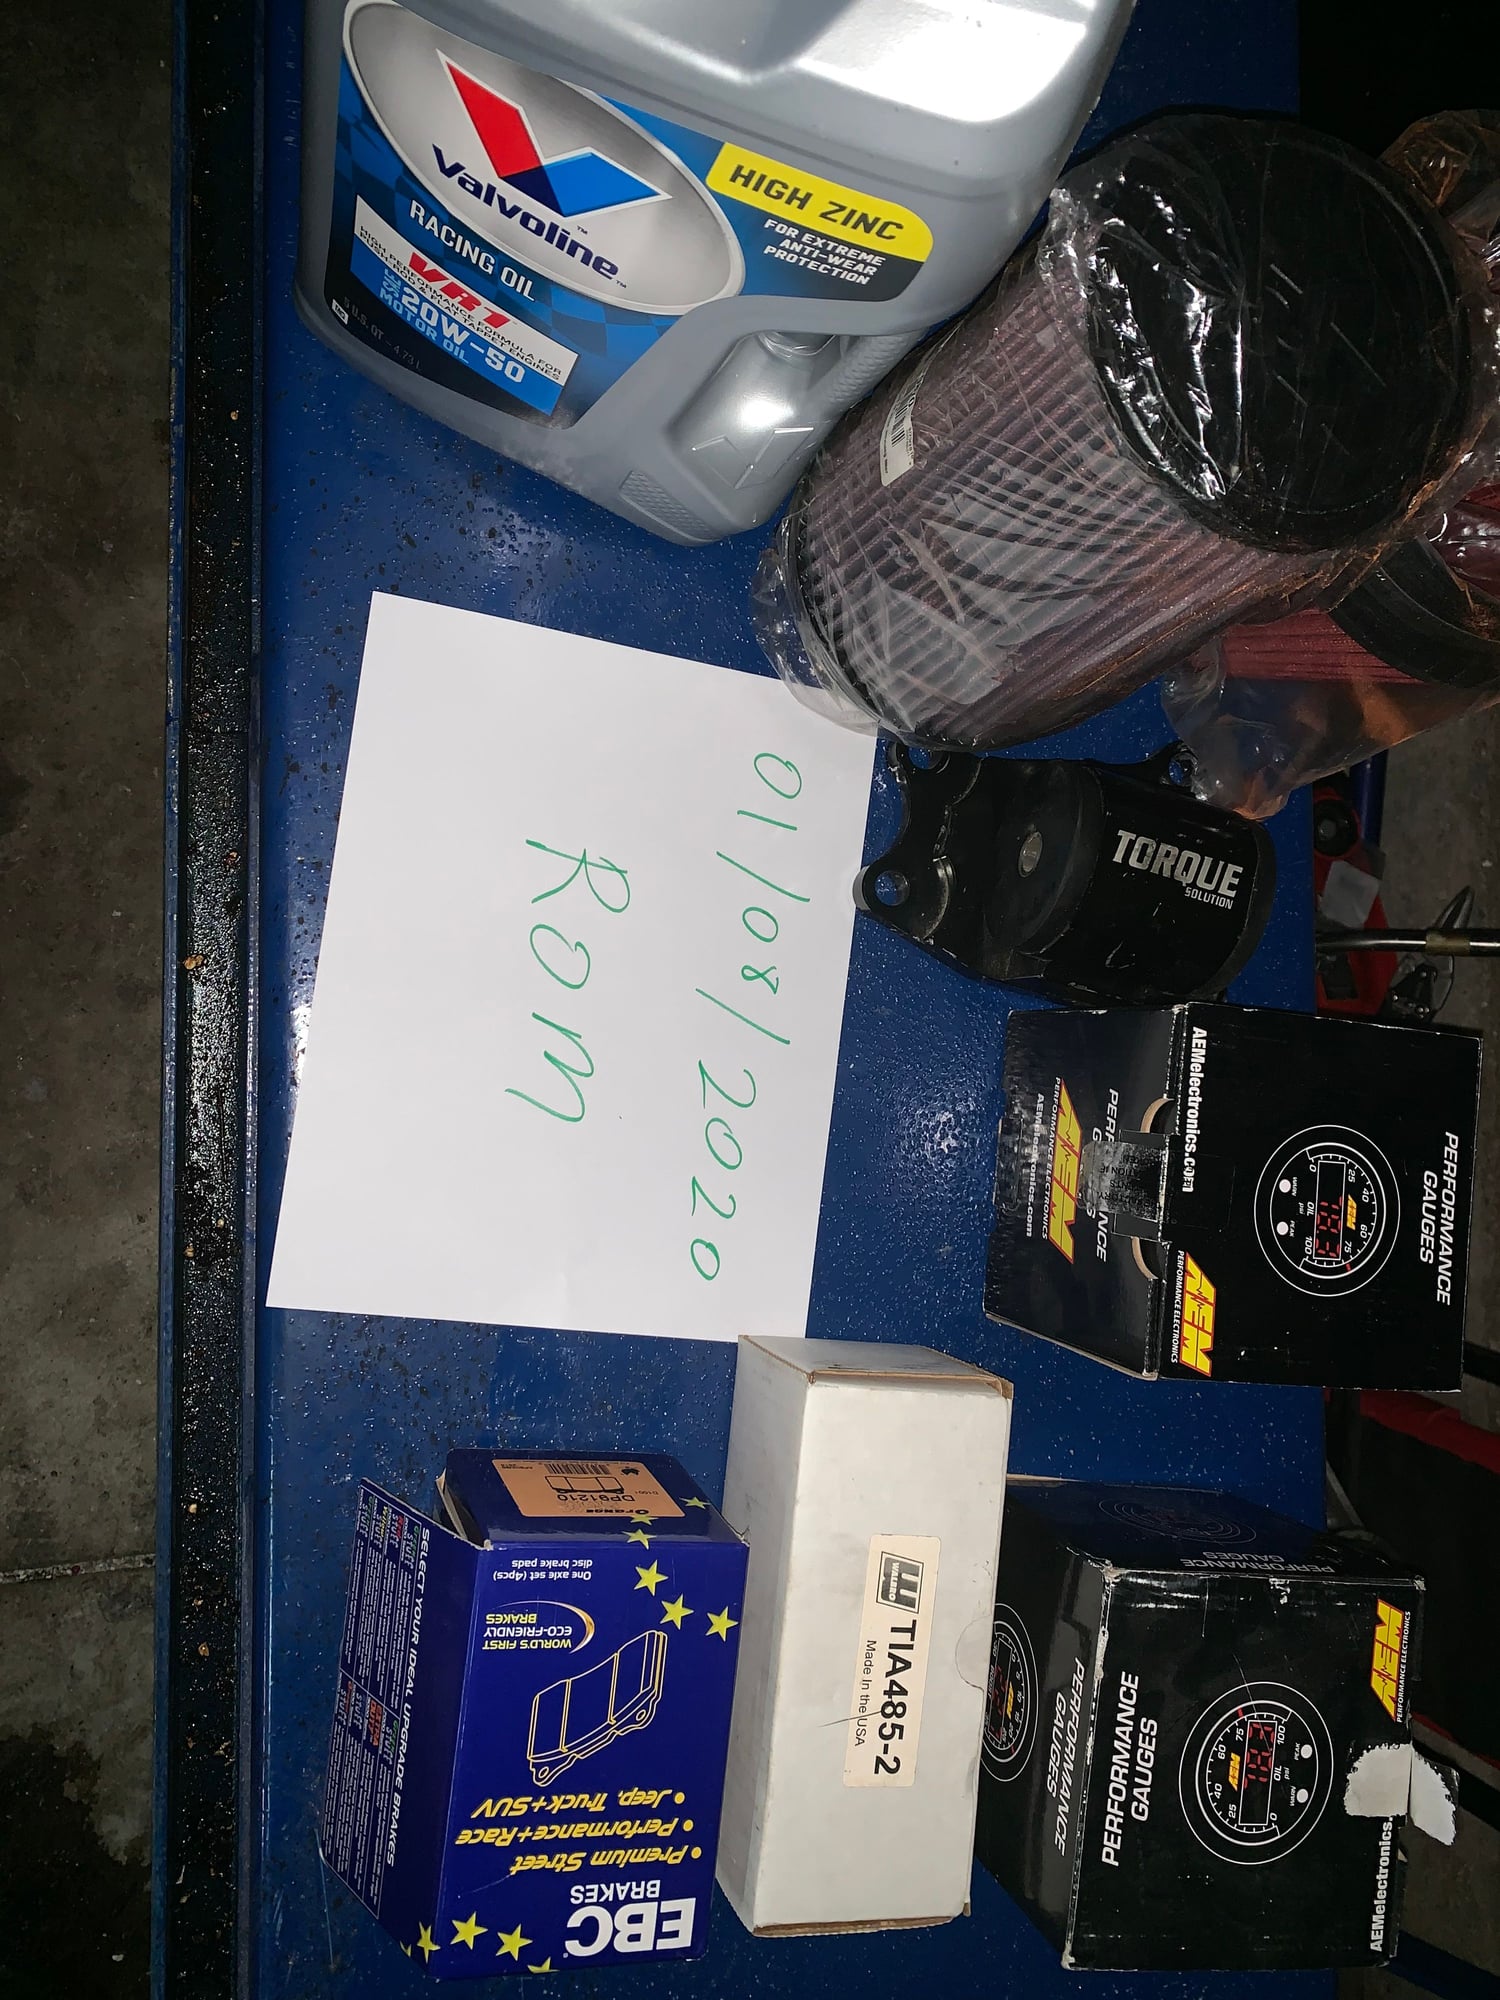 Miscellaneous - Garage cleanout - brand new items! - New - Santa Clara, CA 95054, United States